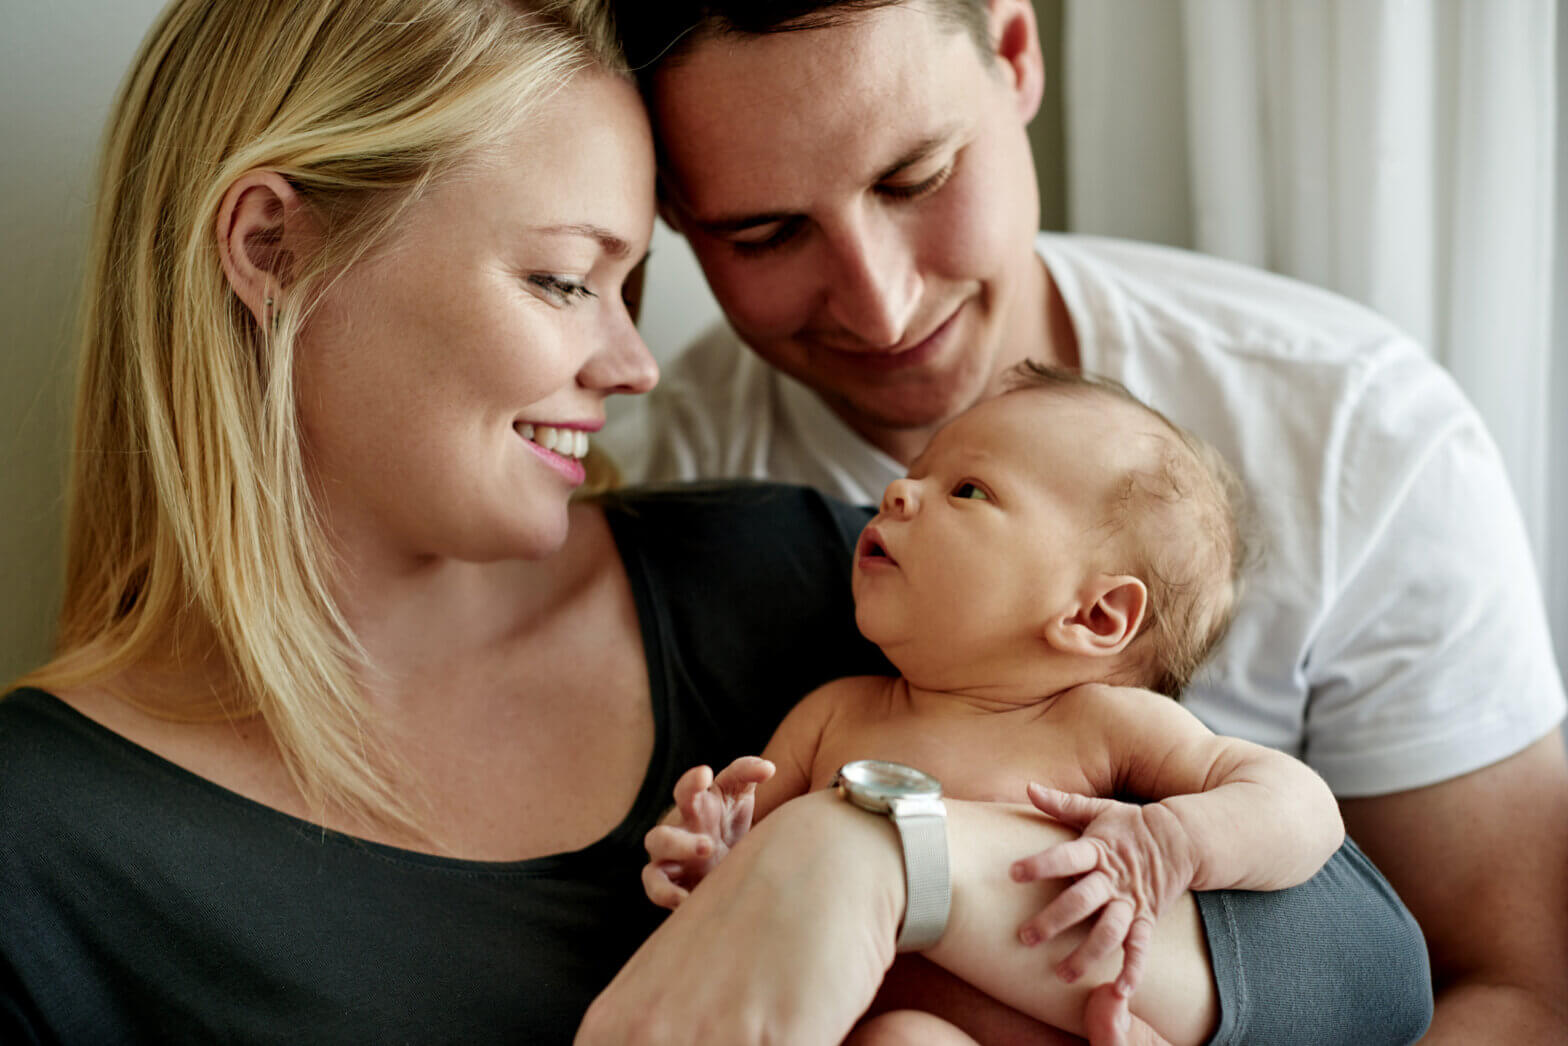 Young parents holding a baby, smiling